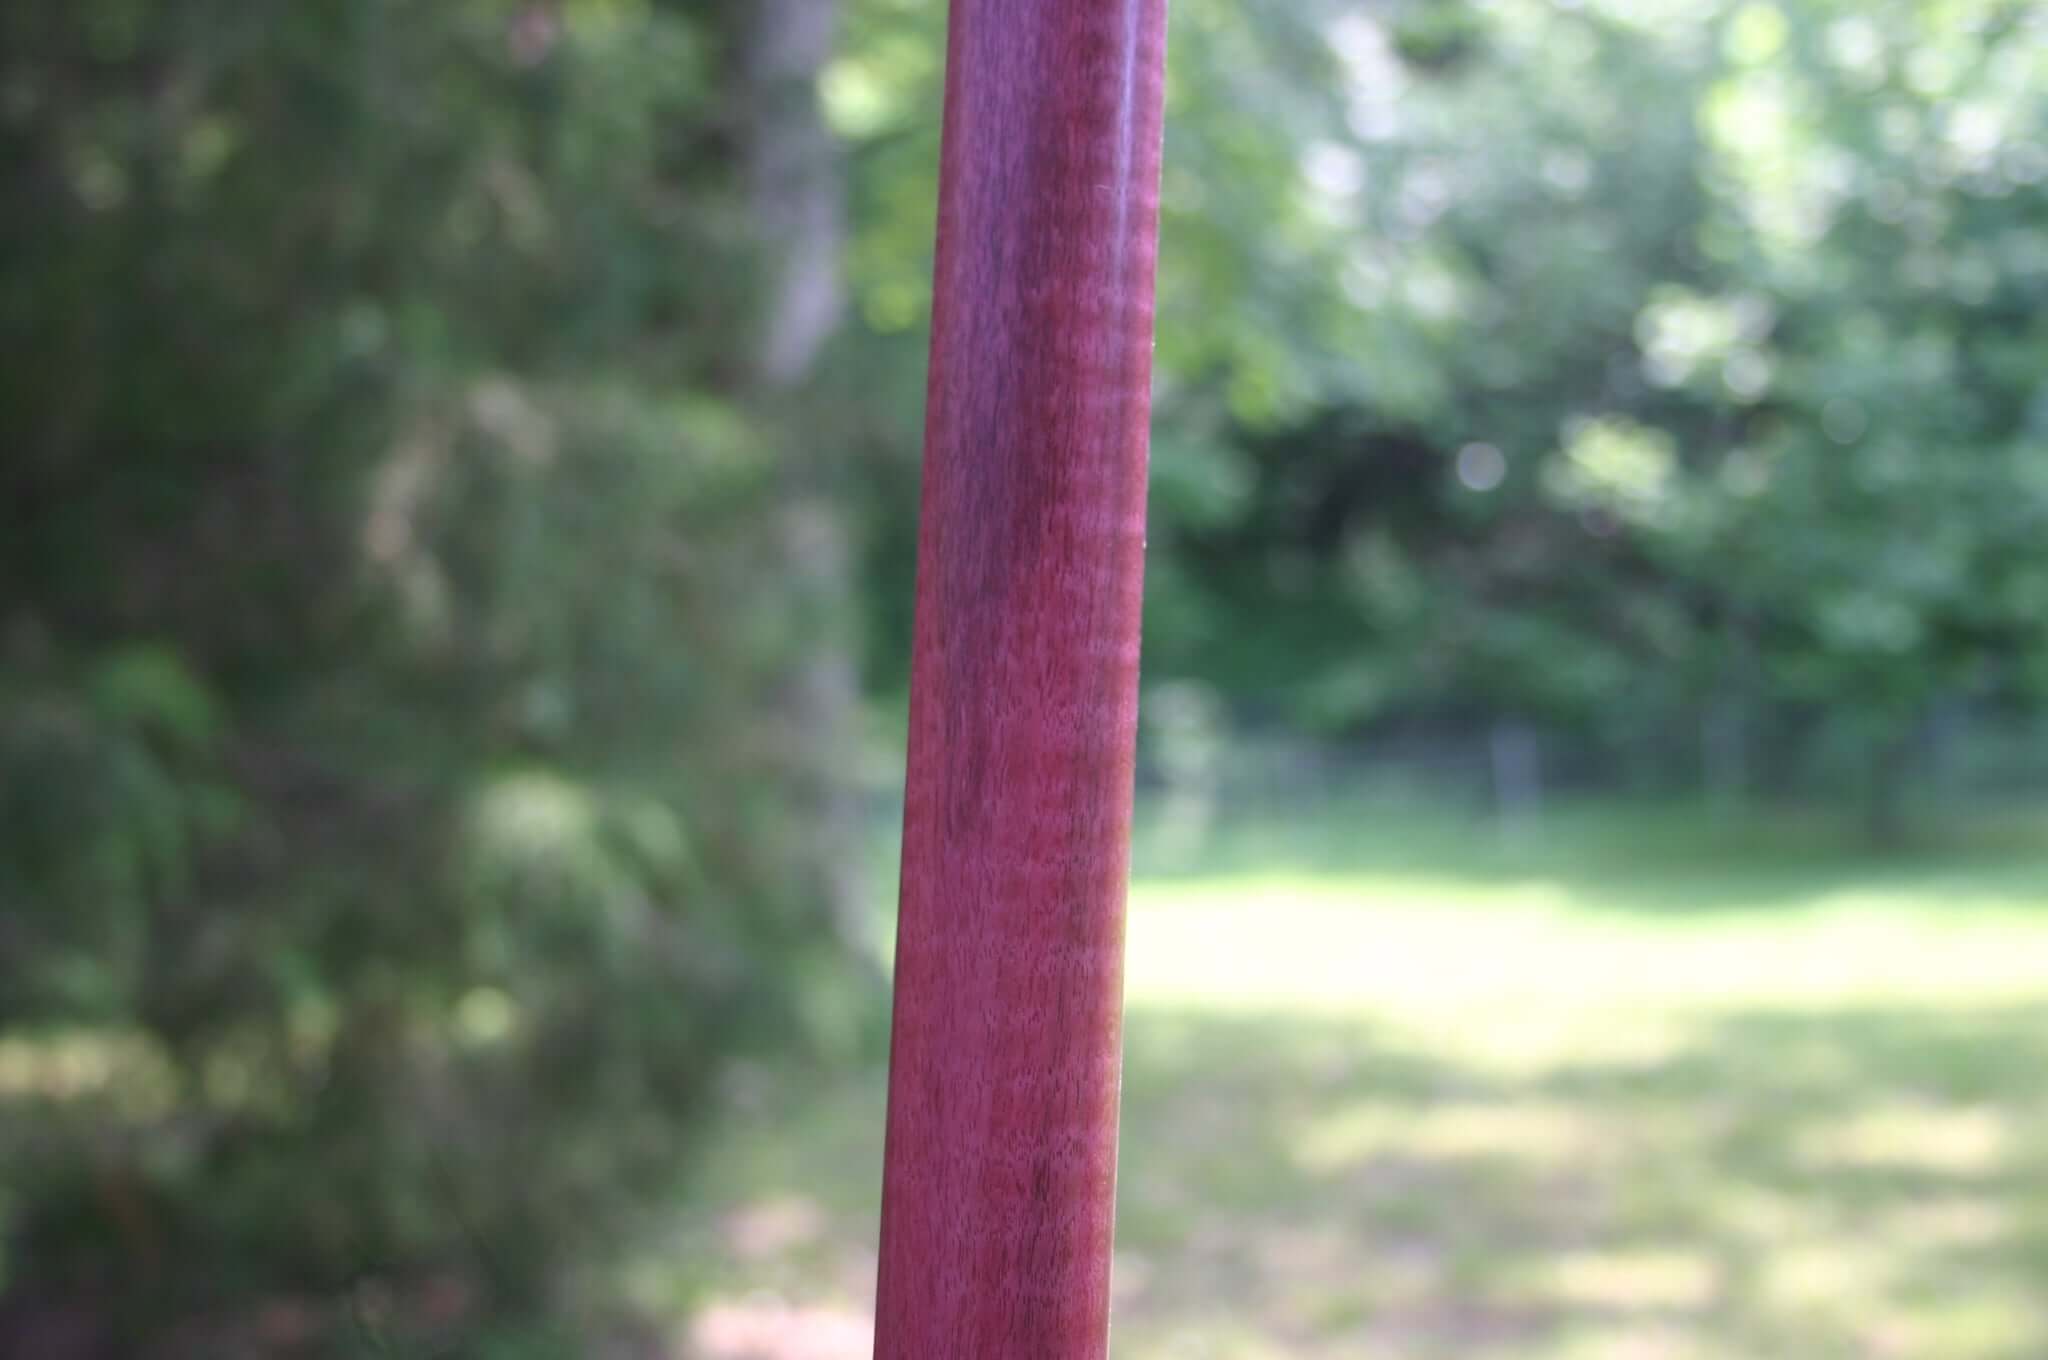 Tiger striped bo staff made from purpleheart wood for karate